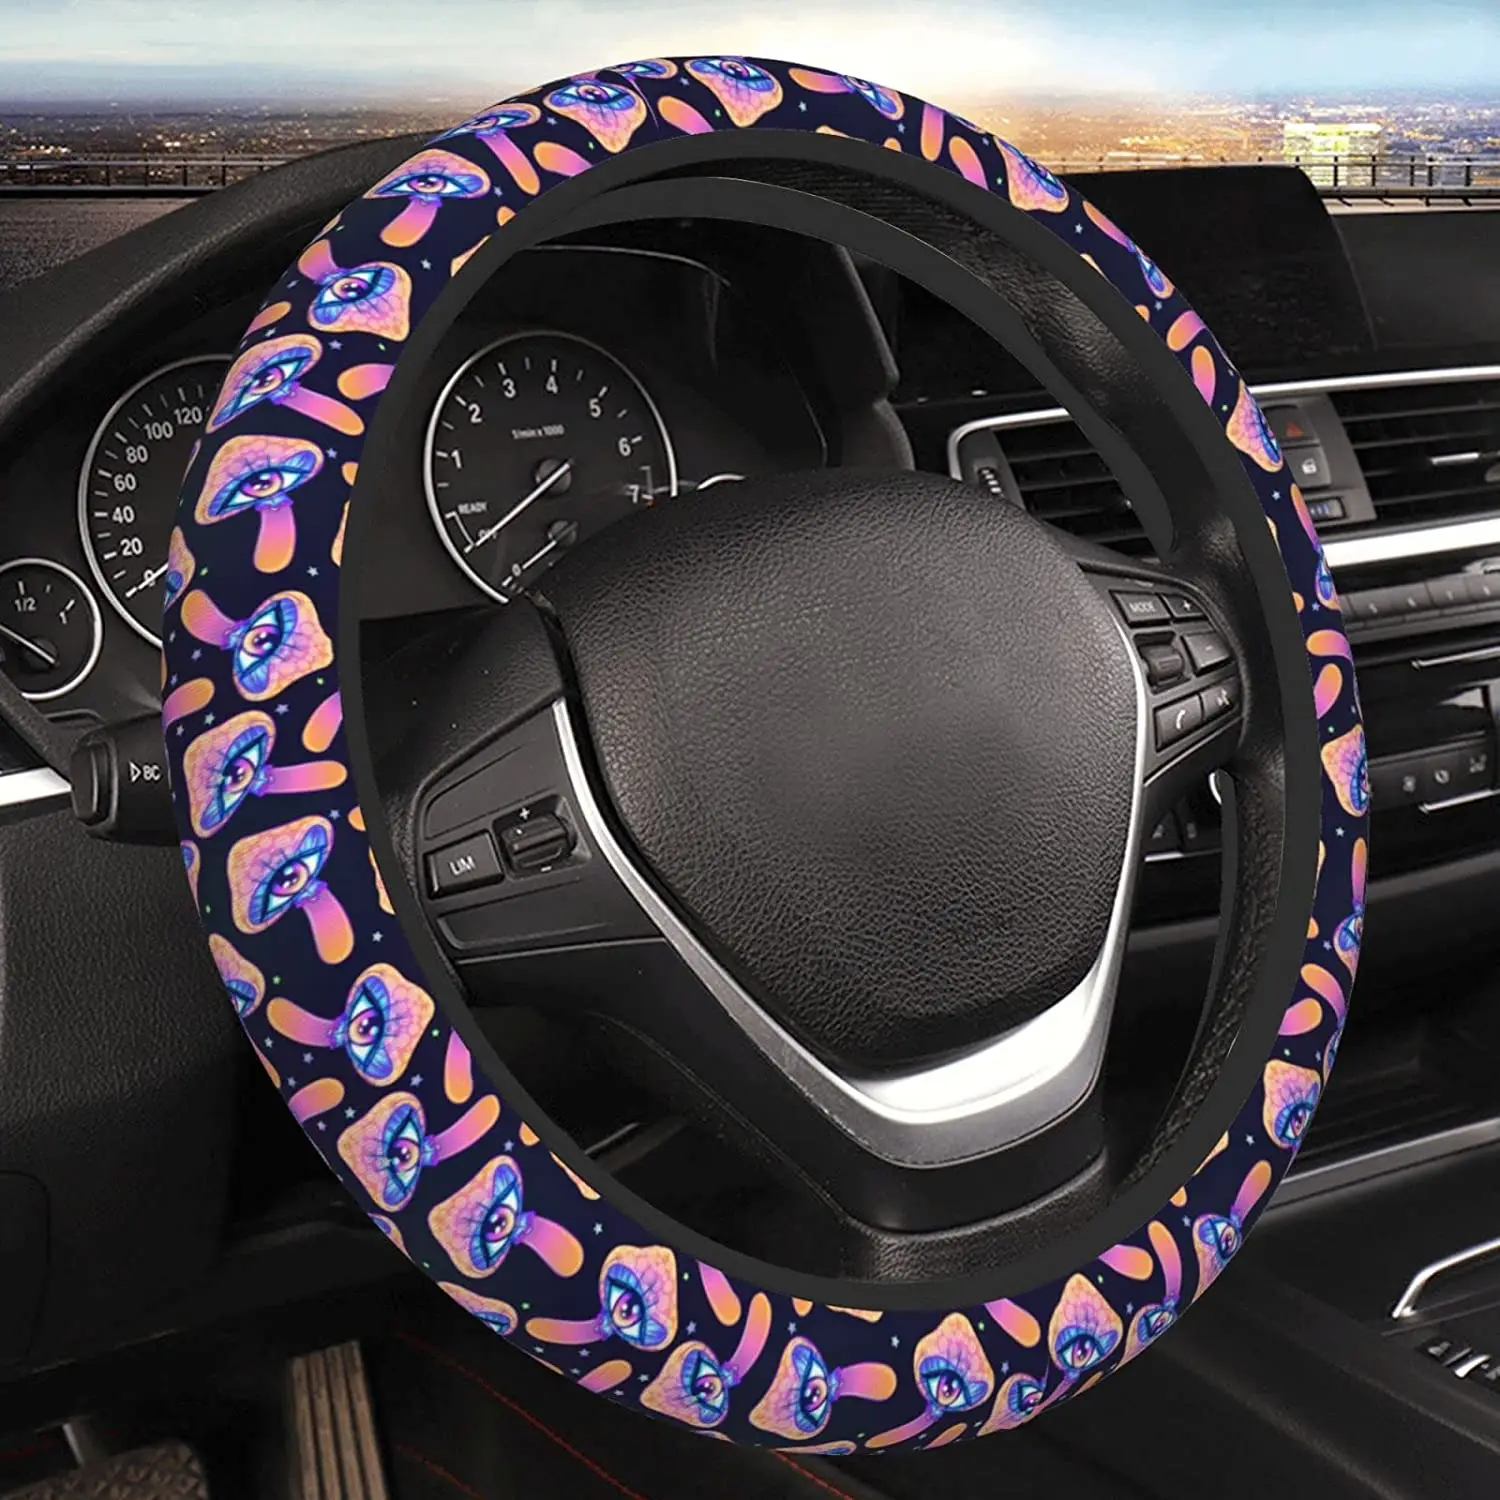 

Women Trippy Mushrooms Magic Hippie Steering Wheel Cover Universal 15 Inches Steering Wheel Cover Fashion Non-Slip Suitable